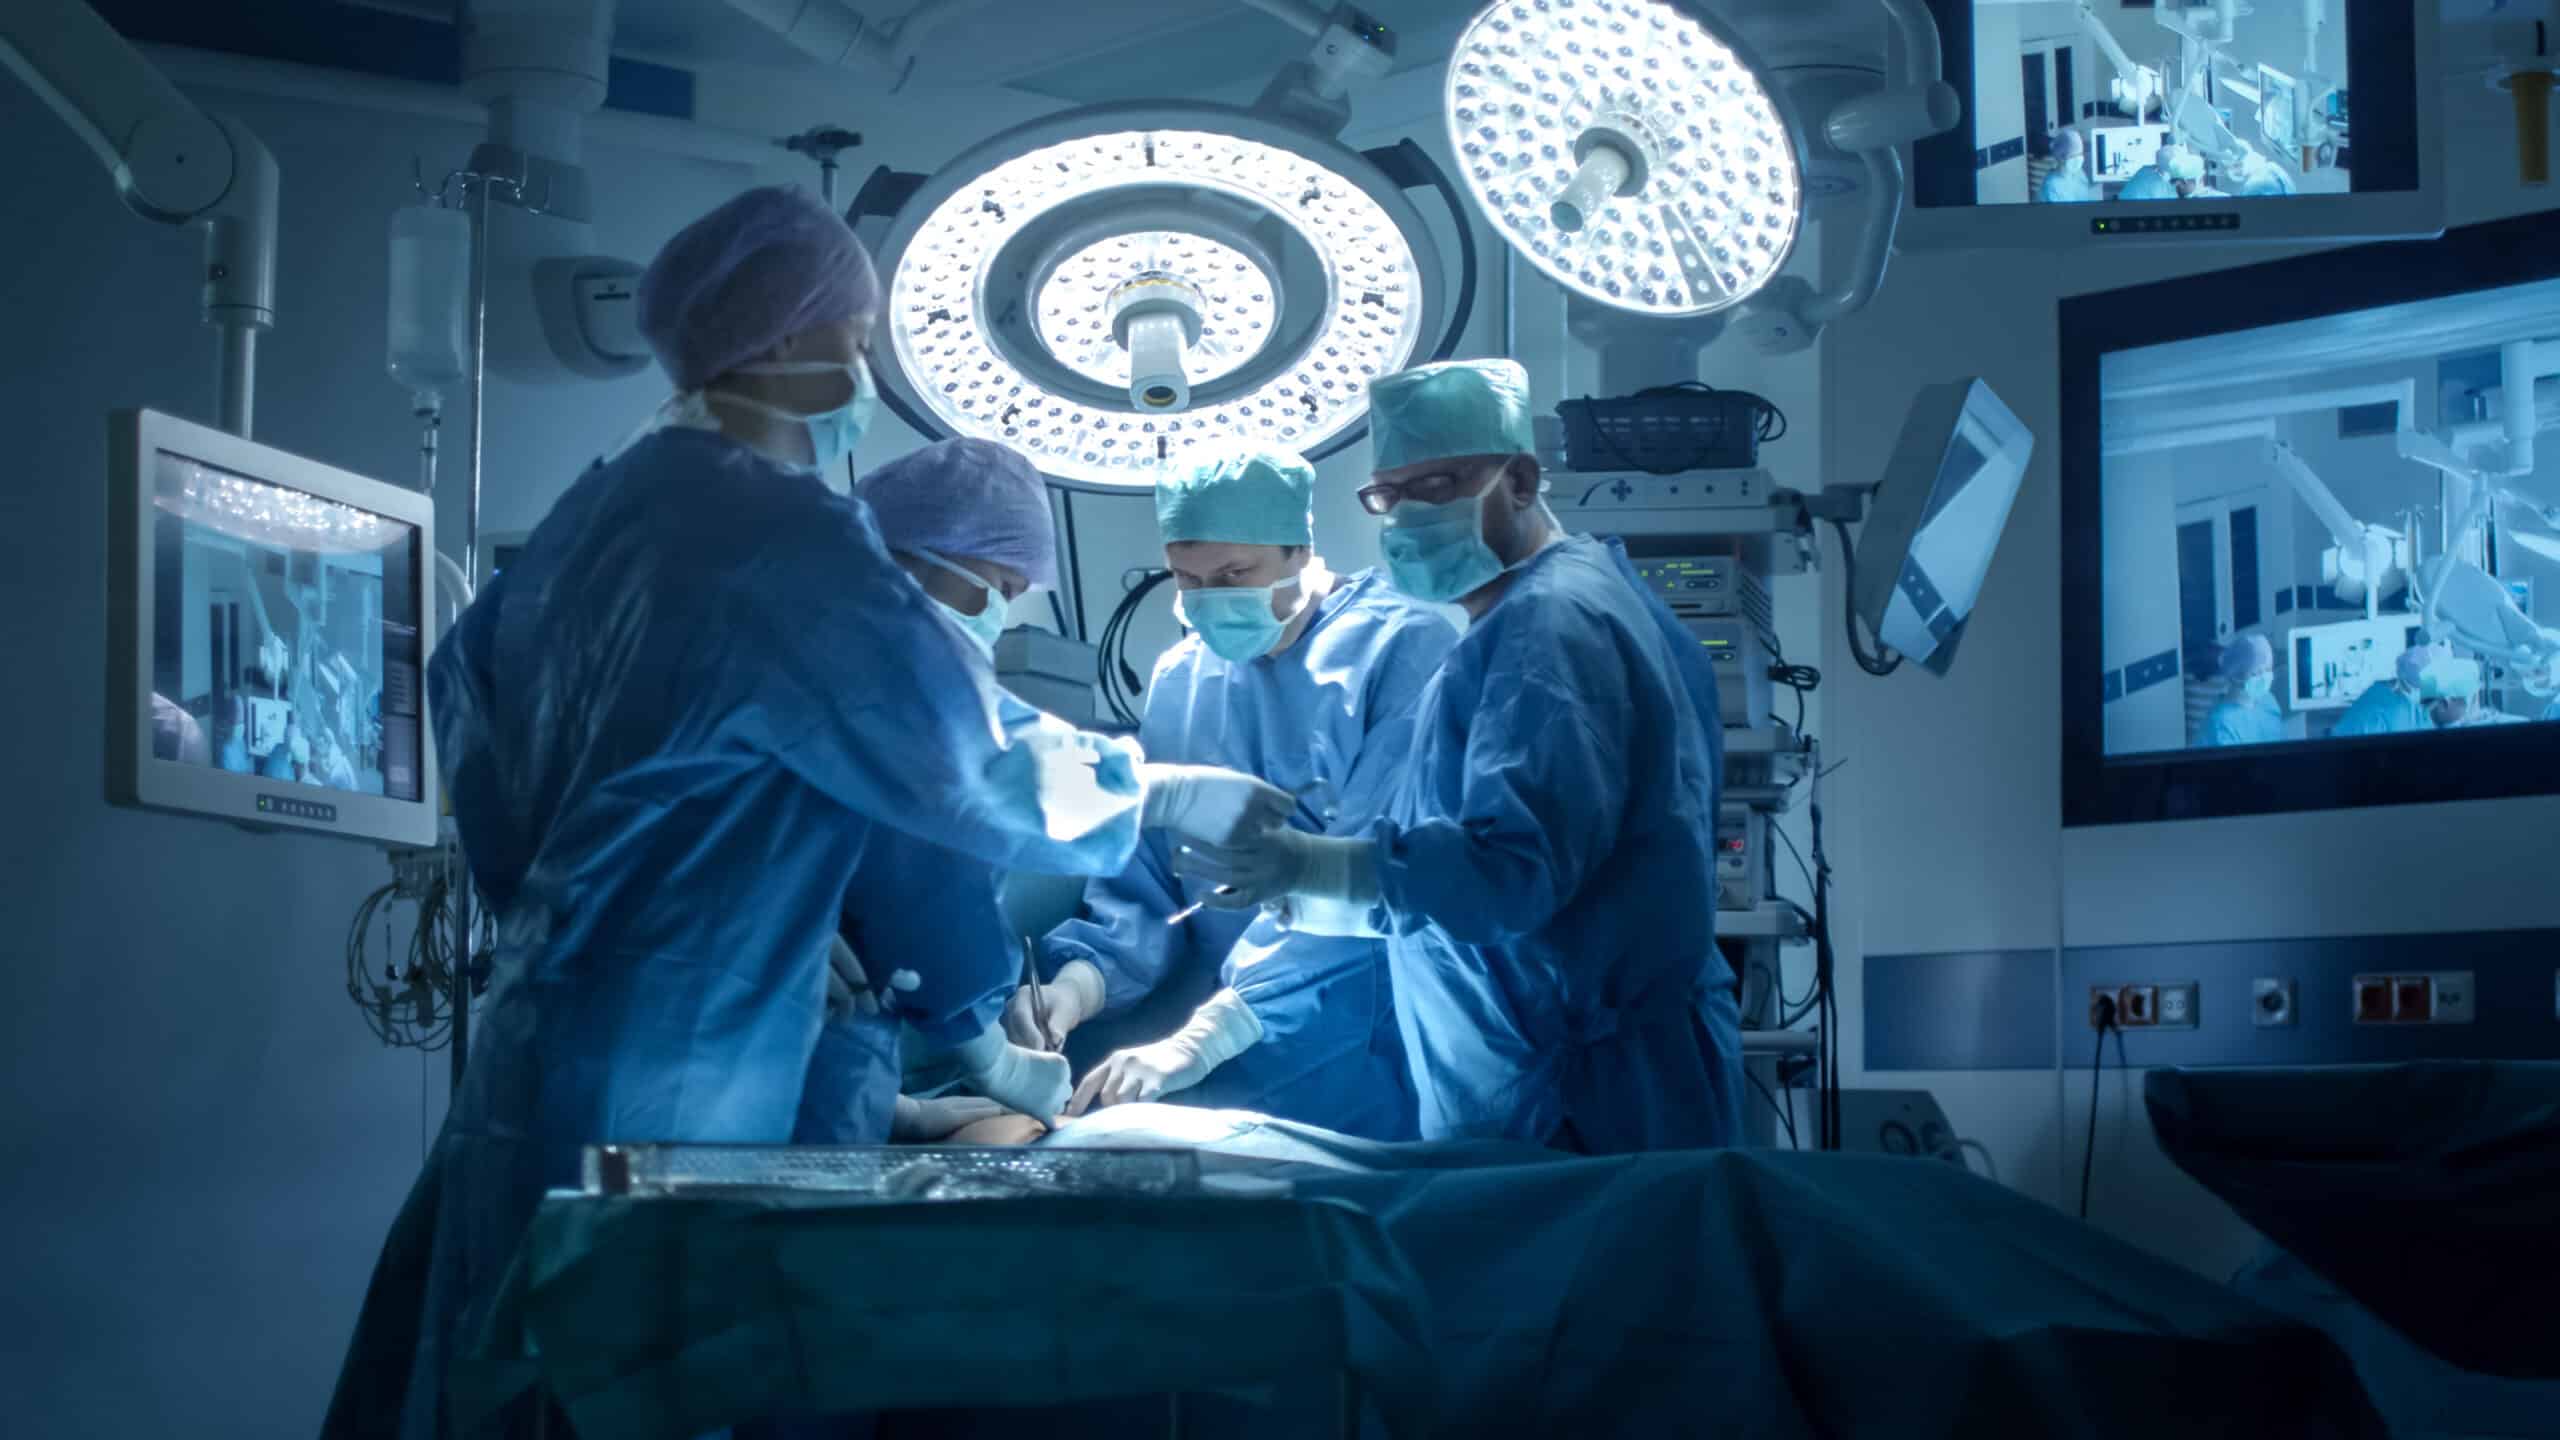 What Are the Common Causes of Surgical Errors?